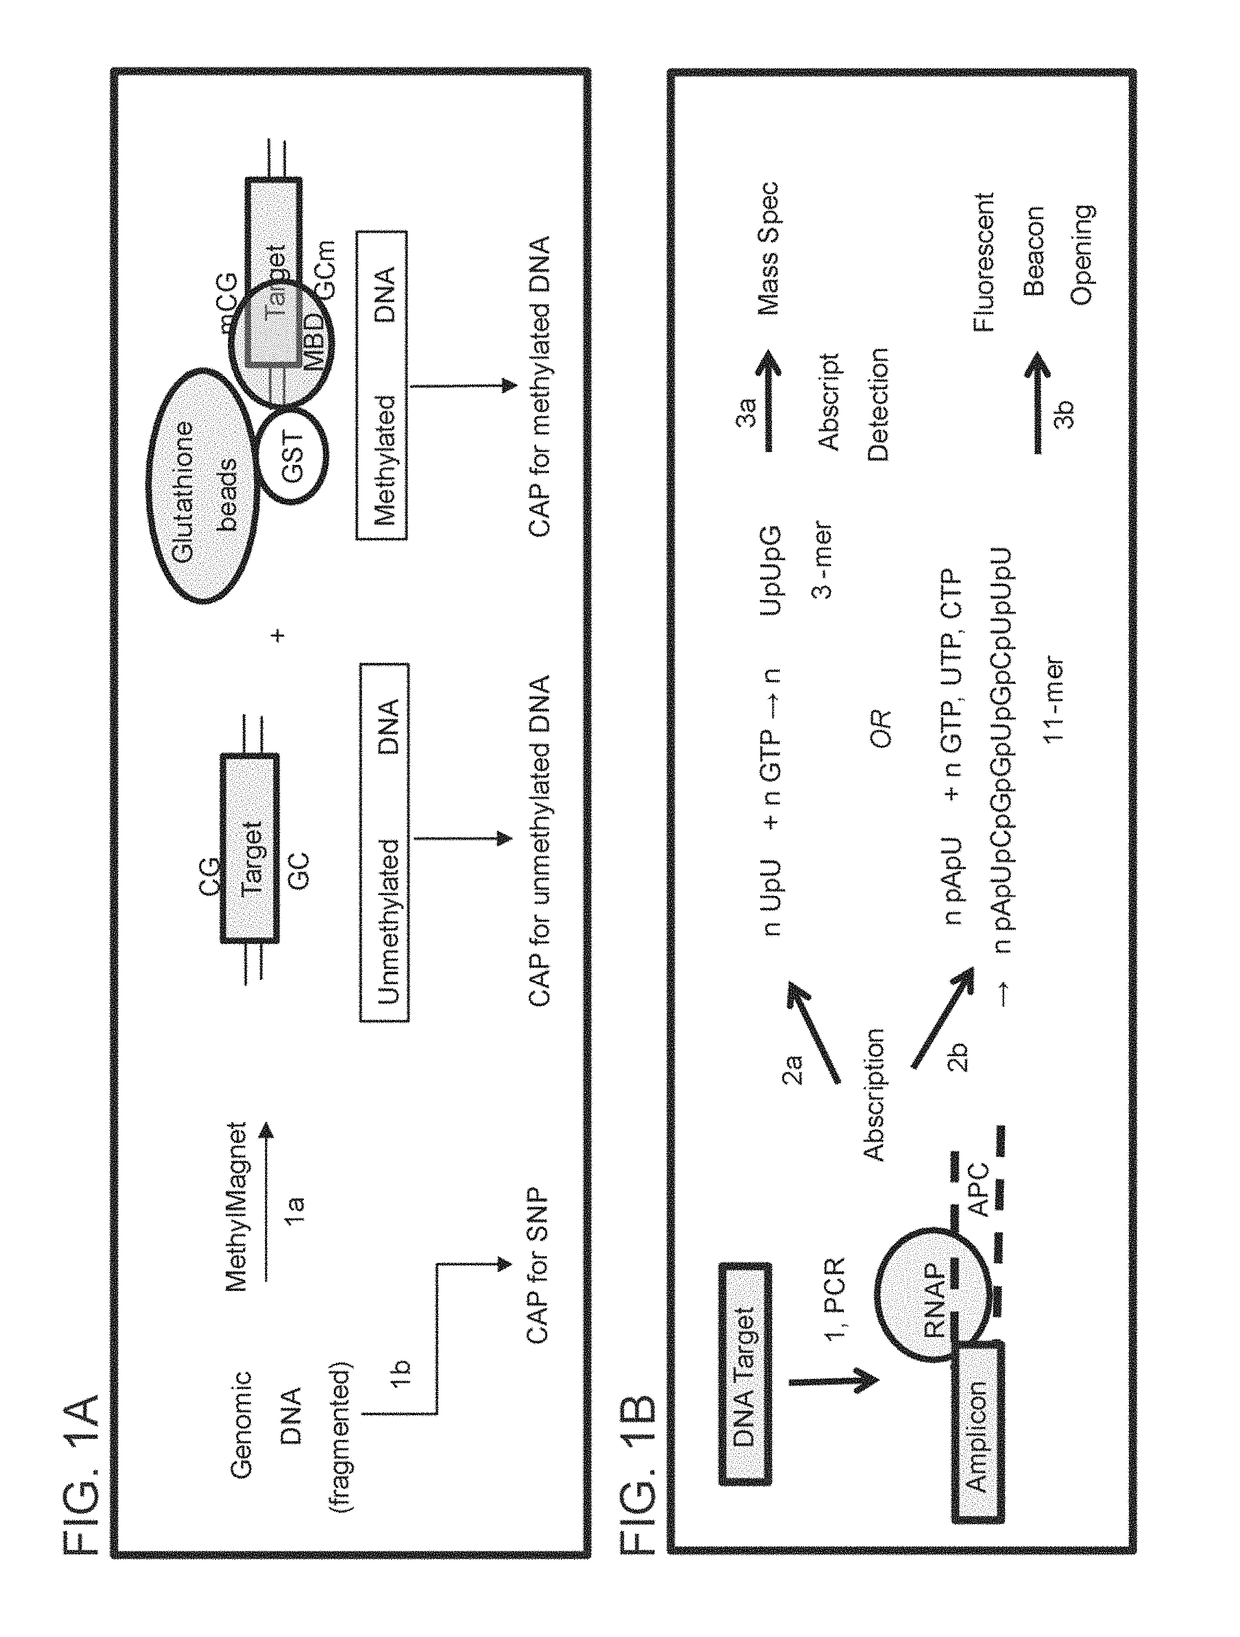 ABORTIVE PROMOTER CASSETTES AND METHODS FOR FUSION TO TARGETS AND QUANTITATIVE CpG ISLAND METHYLATION DETECTION USING THE SAME